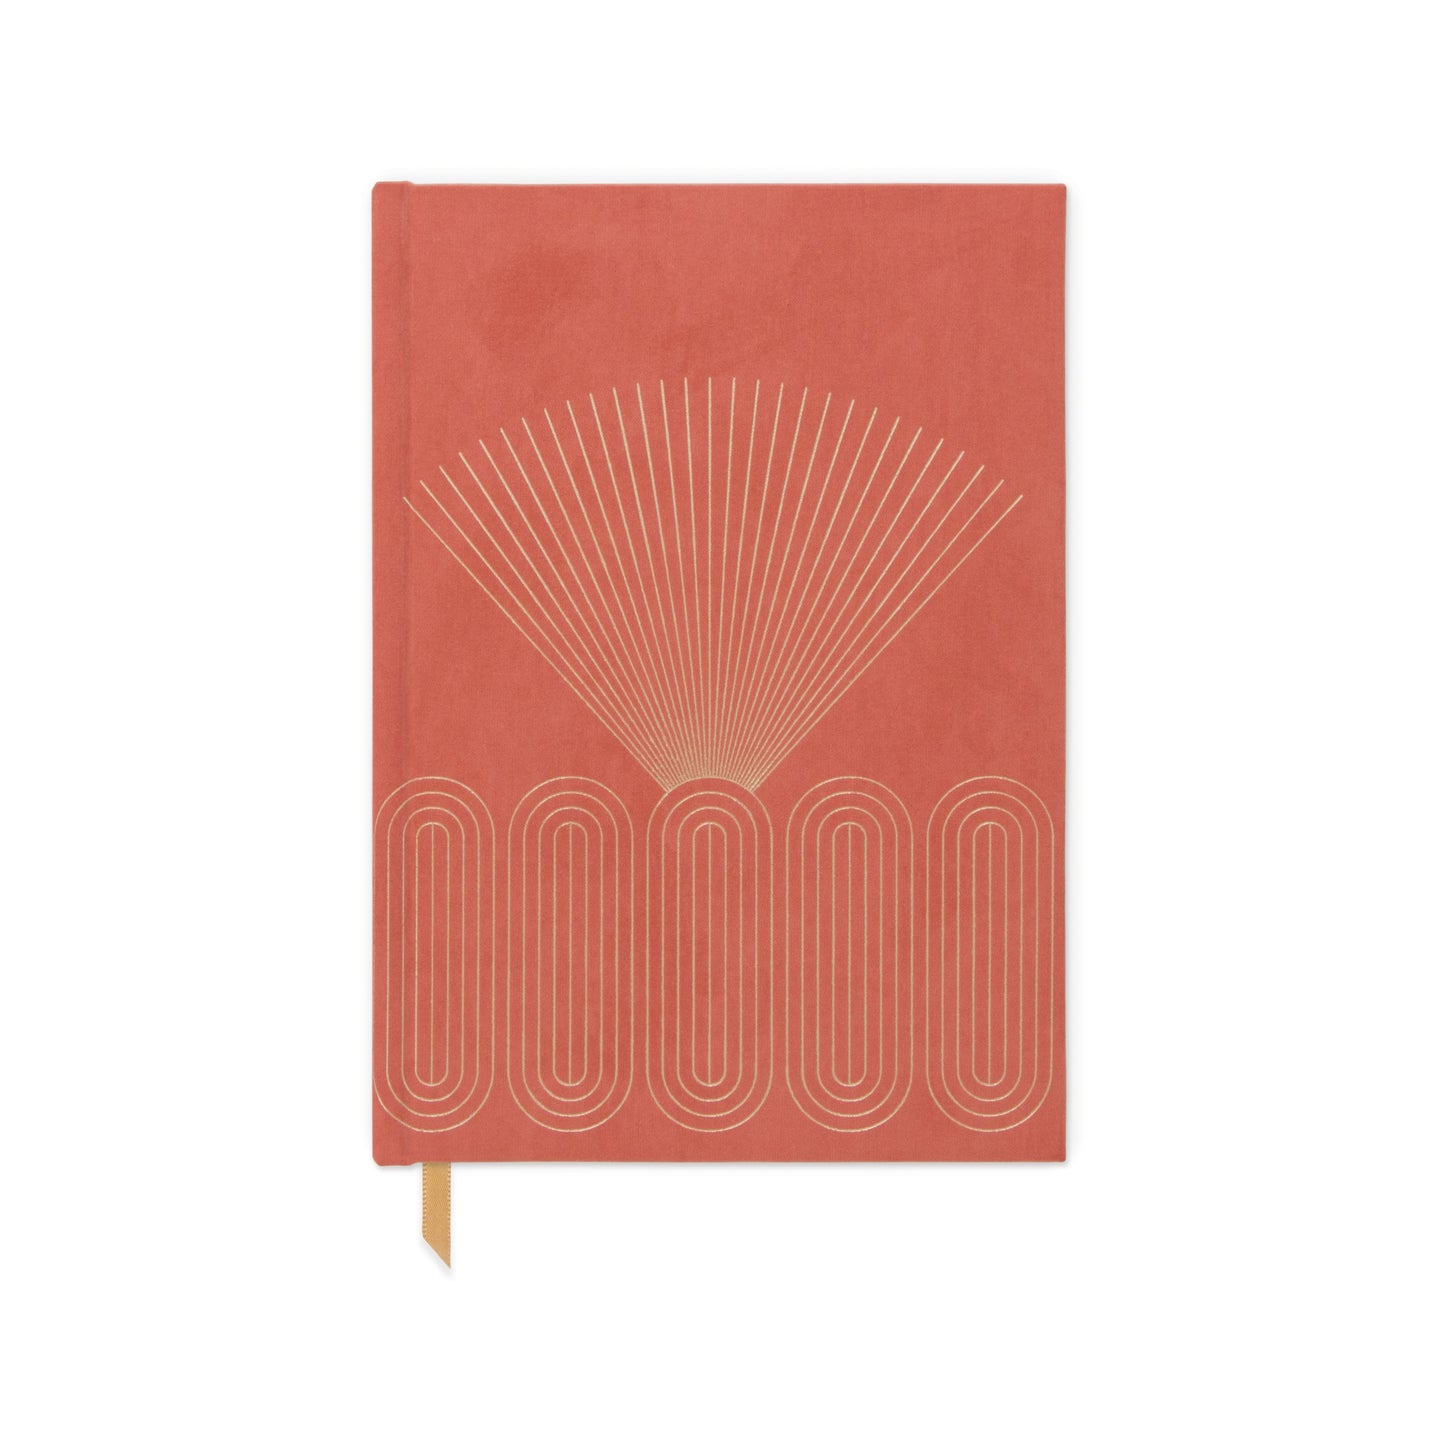 Hard Cover Suede Cloth Journal with Pocket - Radiant Rays